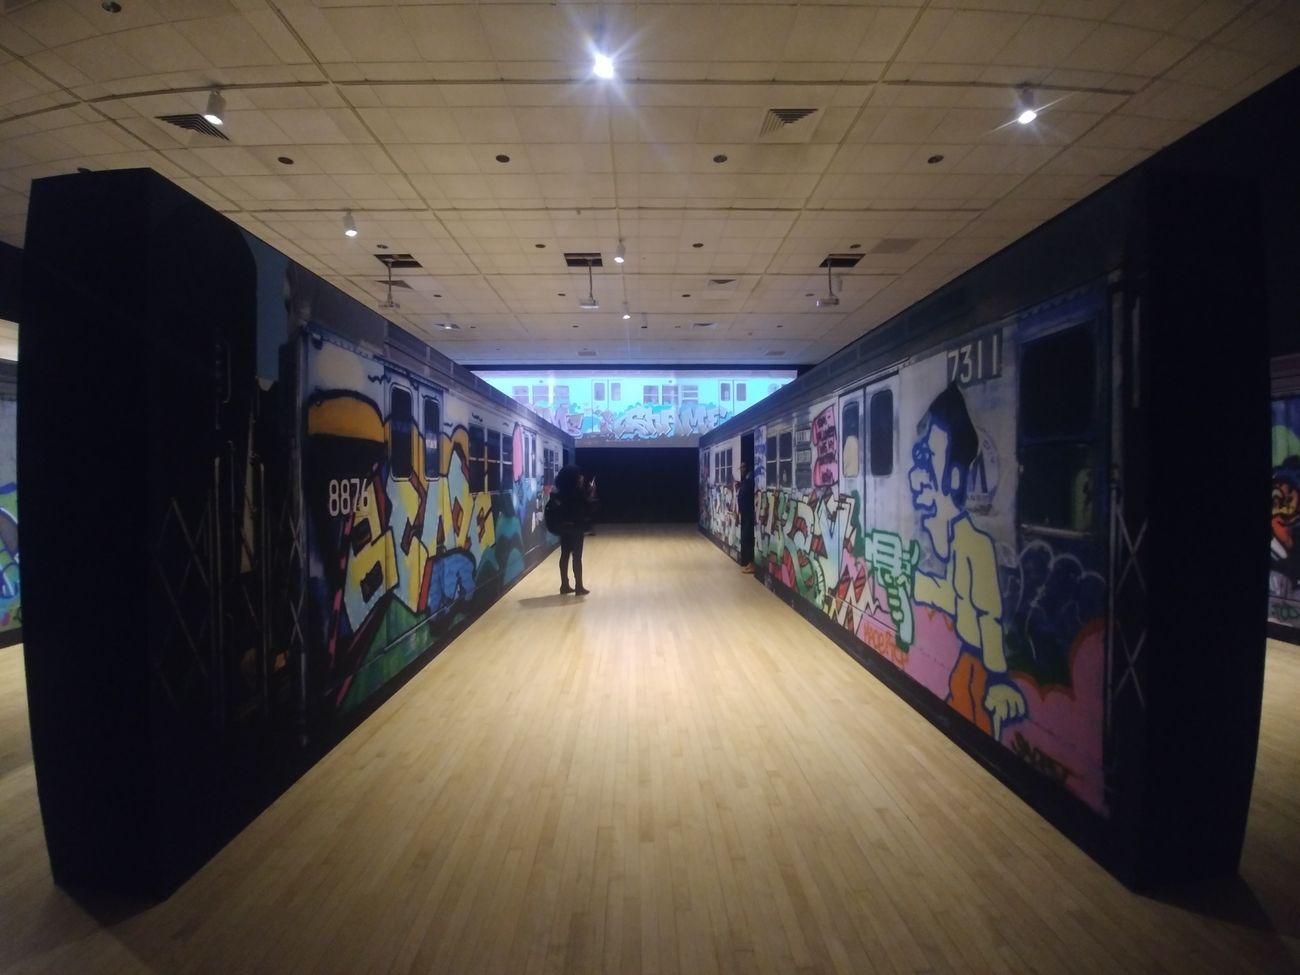 Henry Chalfant. Art vs. Transit, 1977 1987. Exhibition view at The Bronx Museum of the Arts, New York 2019. Photo Maurita Cardone